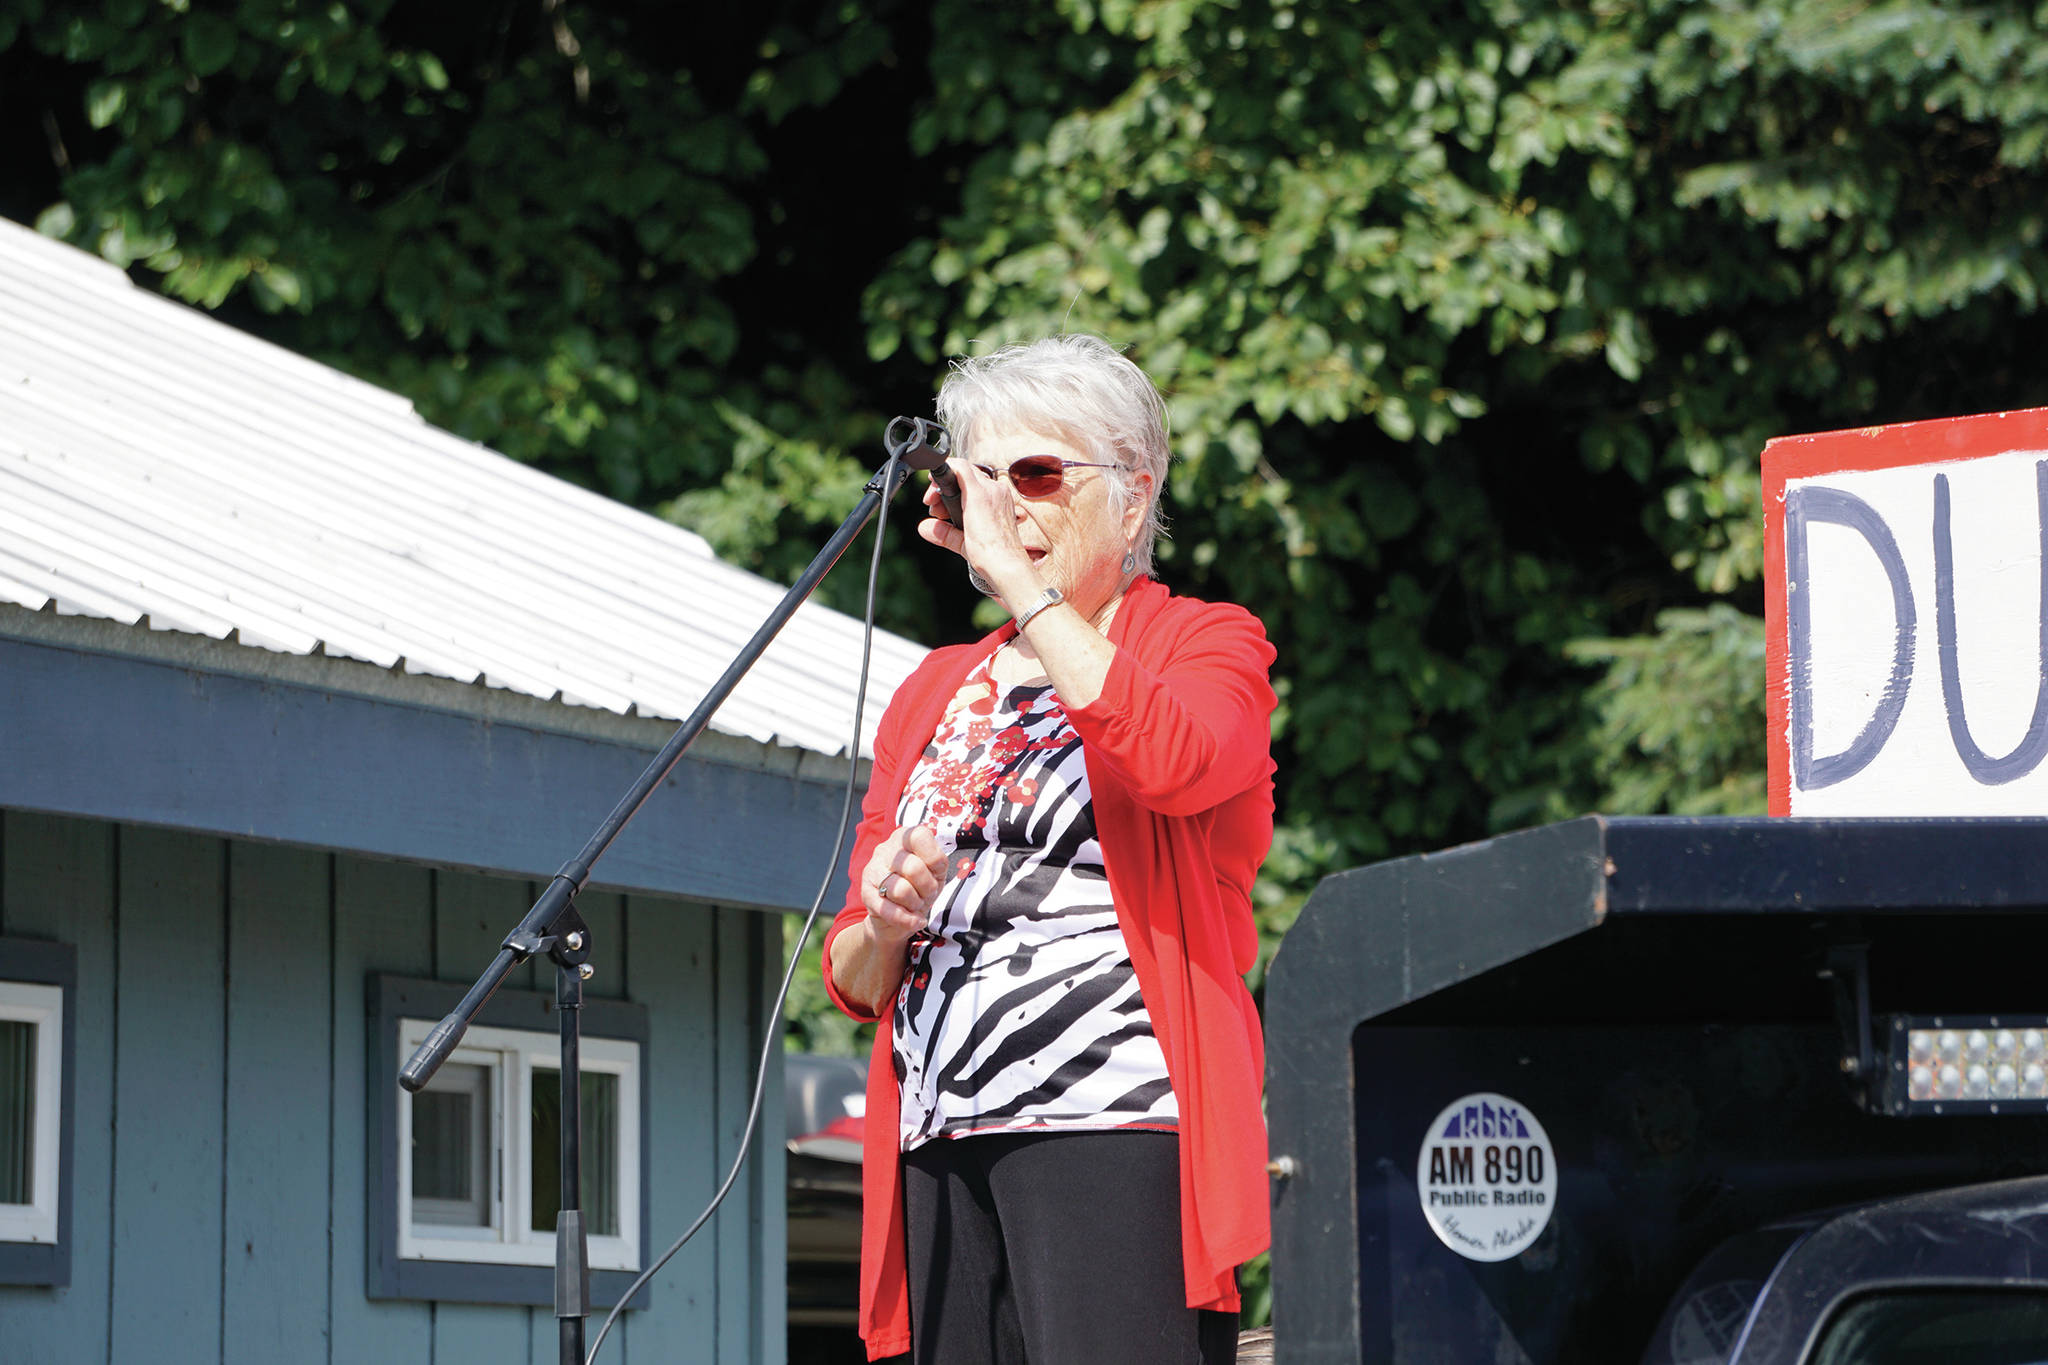 Former Kenai Peninsula Borough Assembly member Milli Martin speaks at a rally Sunday, July 28, 2019, against Gov. Mike Dunleavy’s budget cuts at the Legislative Information Office, Homer, Alaska. (Photo by Michael Armstrong/Homer News).